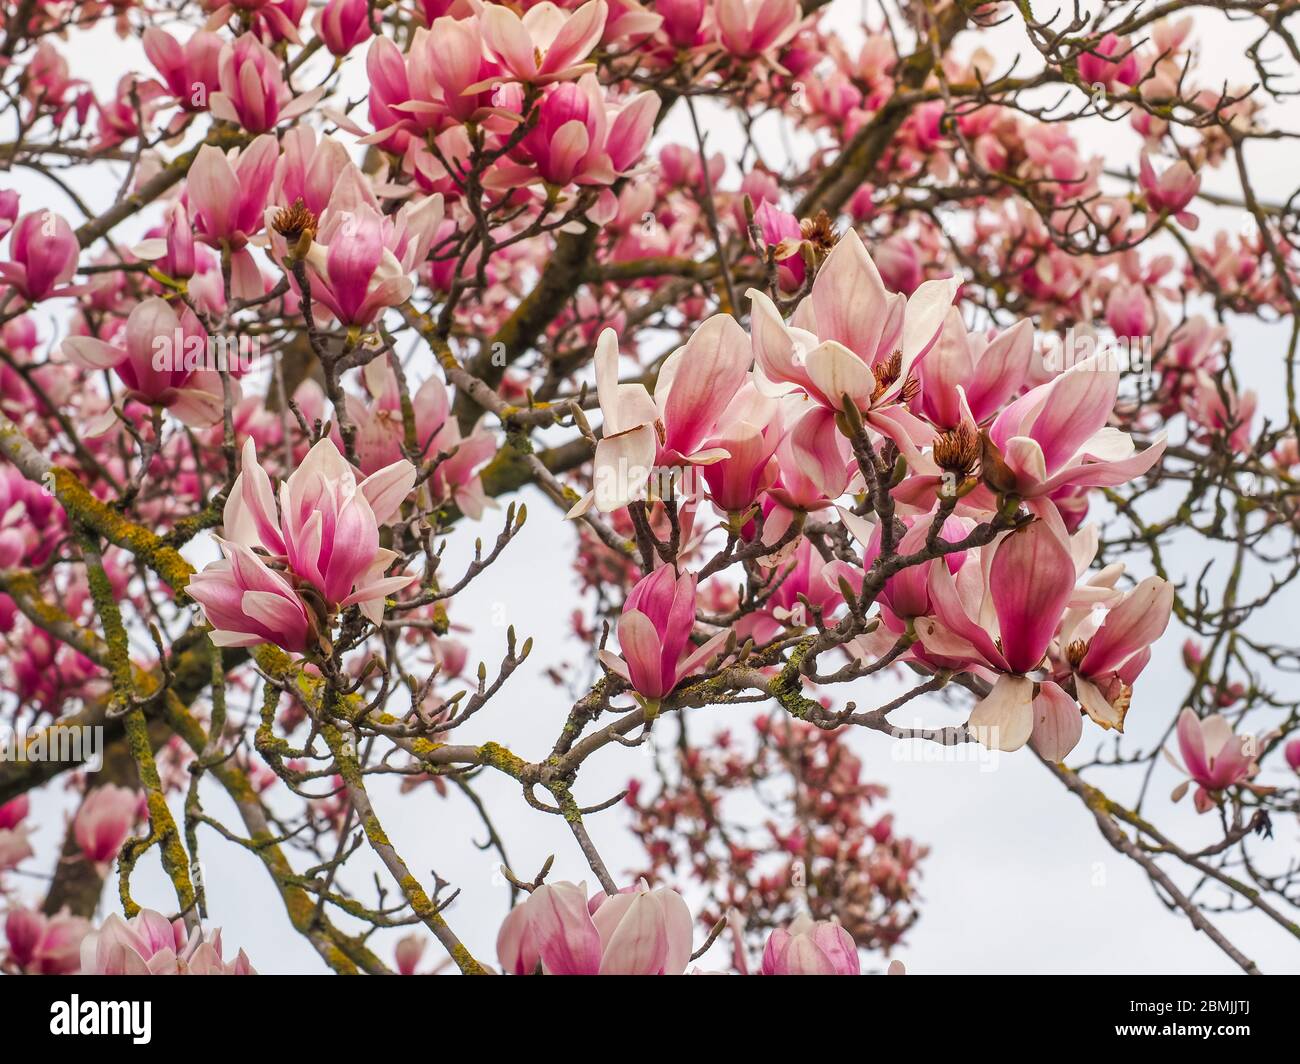 Saucer Magnolia or Magnolia x soulangeana, flowering plant in the family Magnoliaceae. Deciduous woody-orchid tree with large early-bloom pink flowers Stock Photo